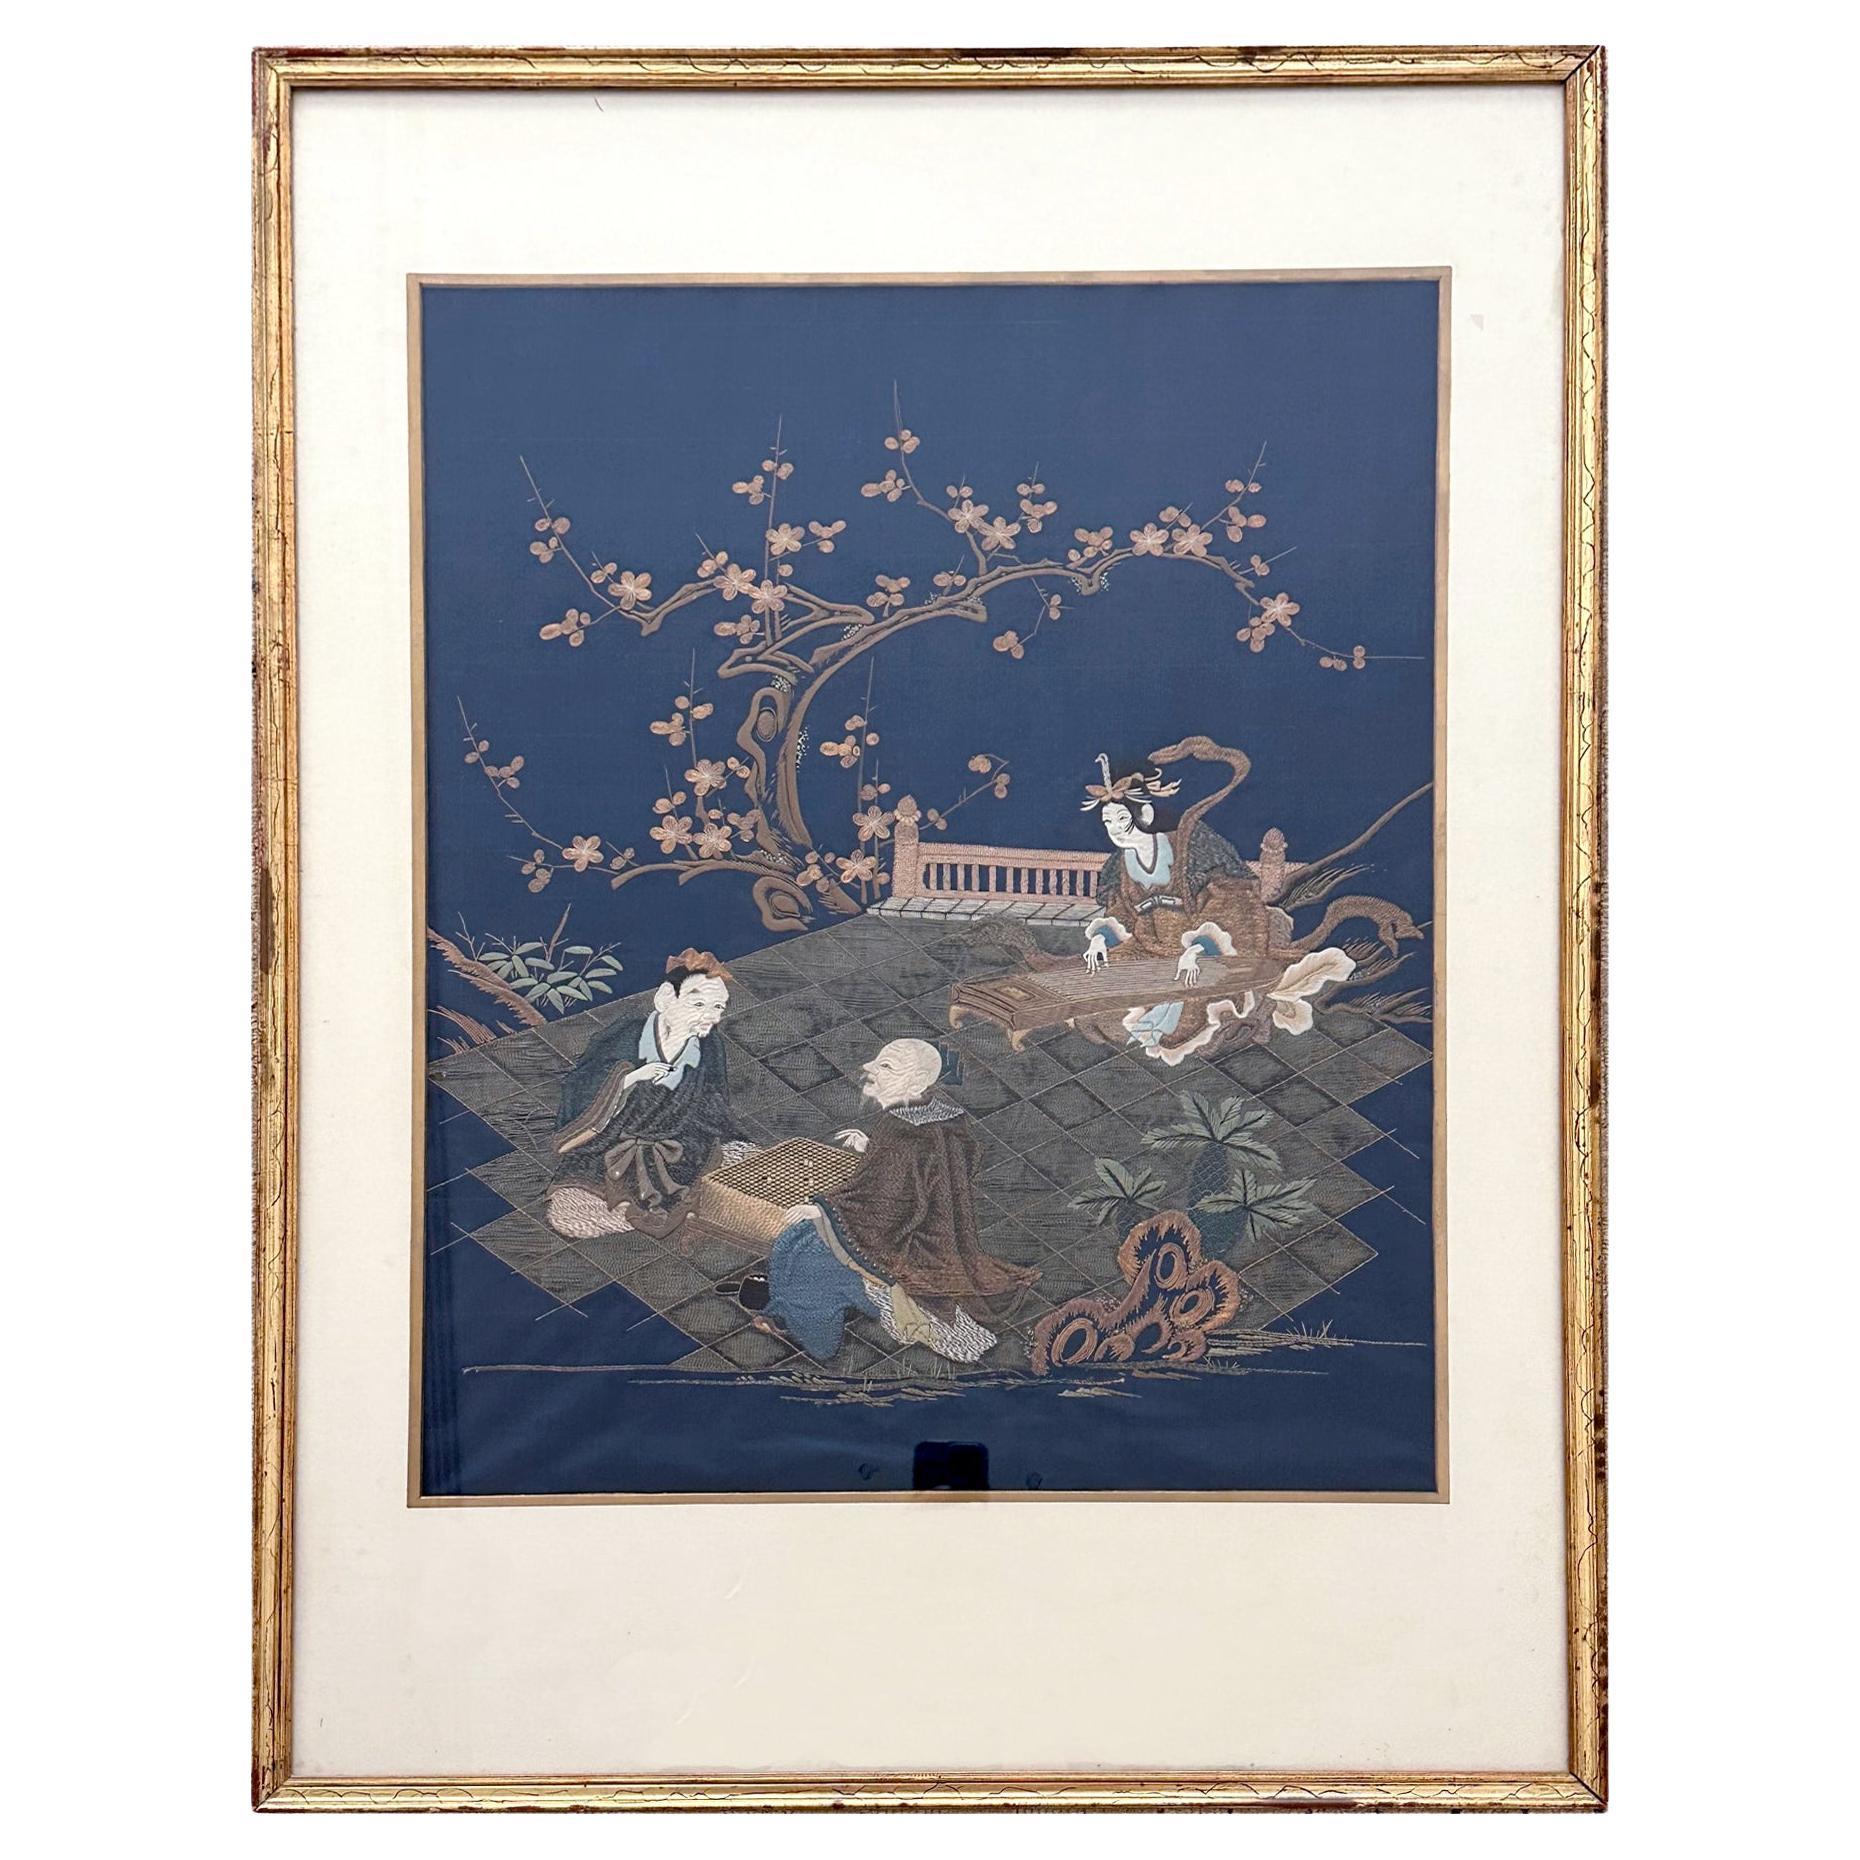 Framed Antique Japanese Embroidery Fukusa Textile Panel